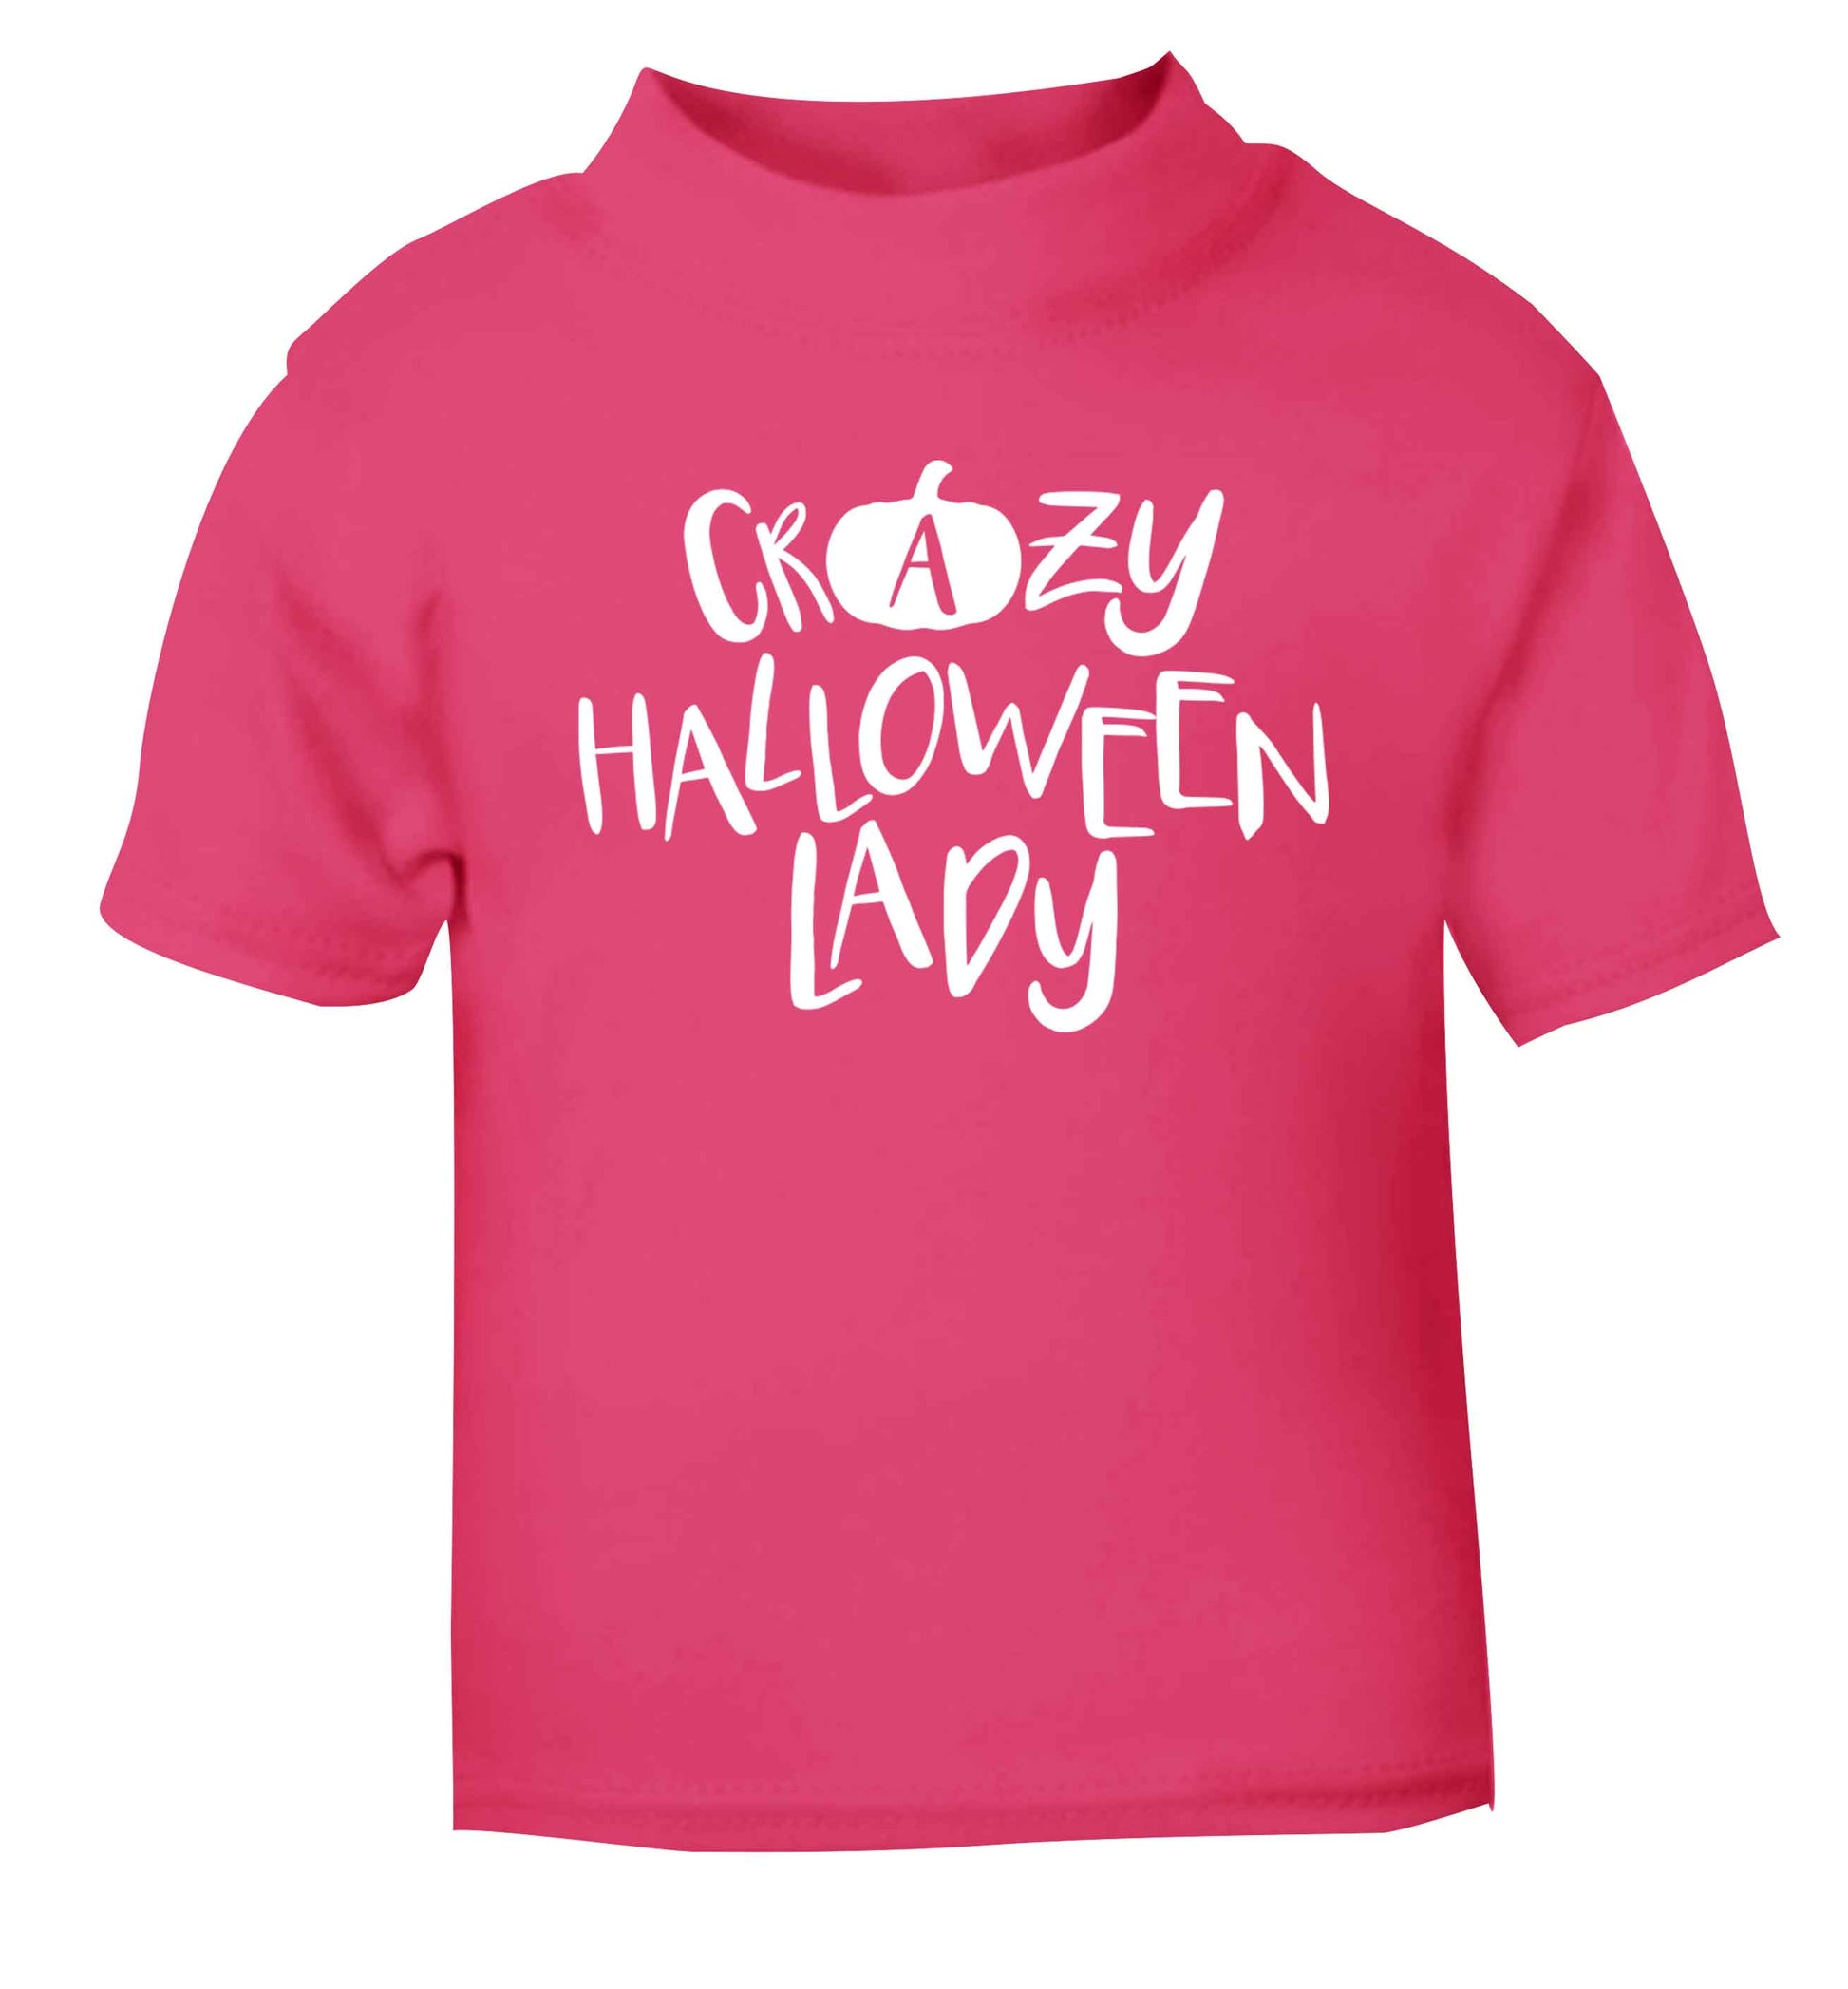 Crazy halloween lady pink baby toddler Tshirt 2 Years